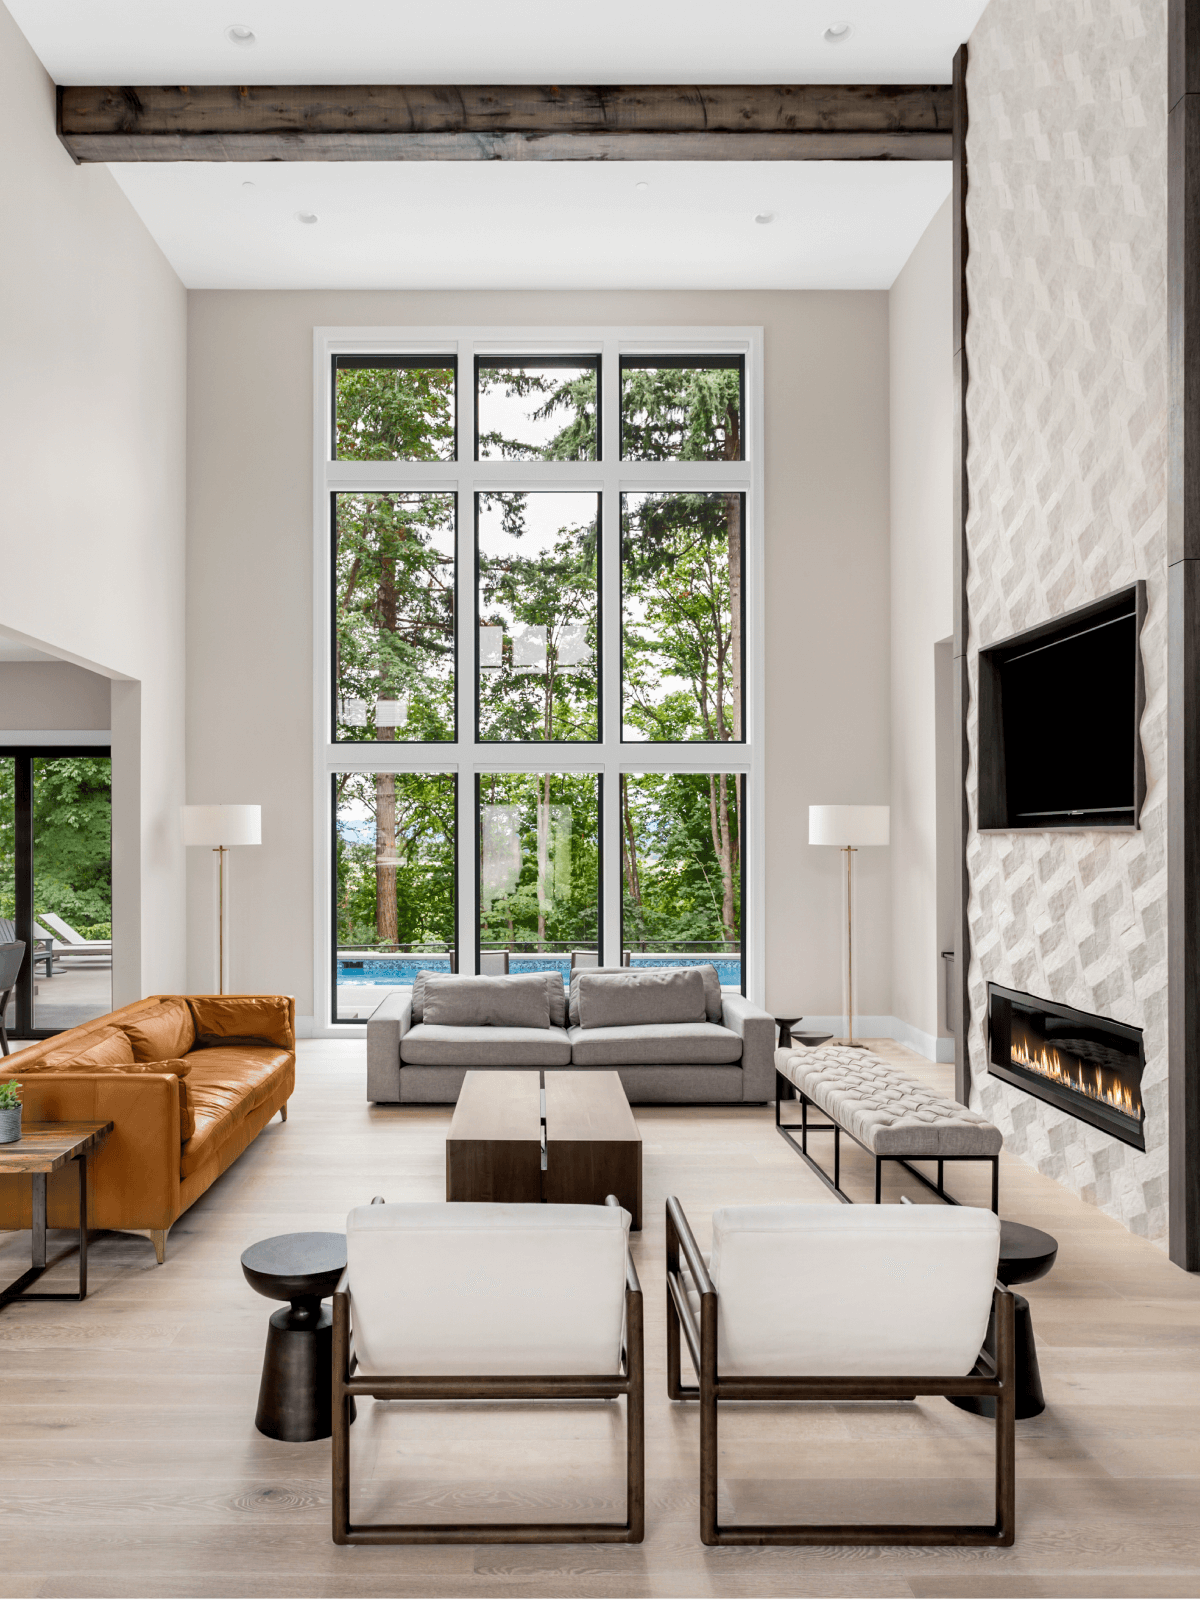 Beautiful living room in new luxury home wall of windows, floor to ceiling fireplace surround, hardwood floors, and exterior view of pool and trees.